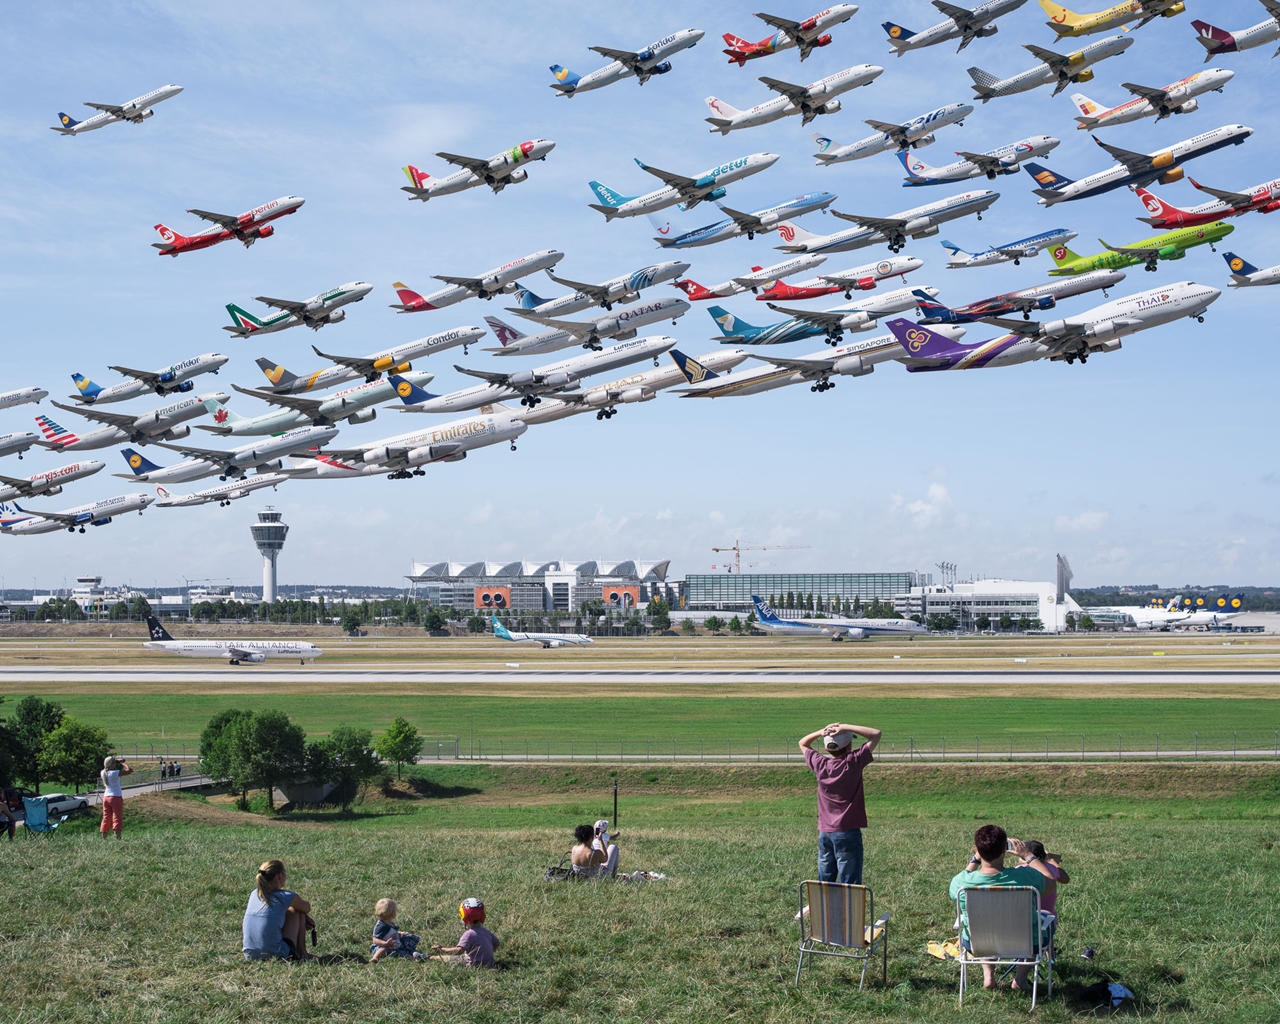 aeroportcity-or-can-planes-fly-in-flocks-07